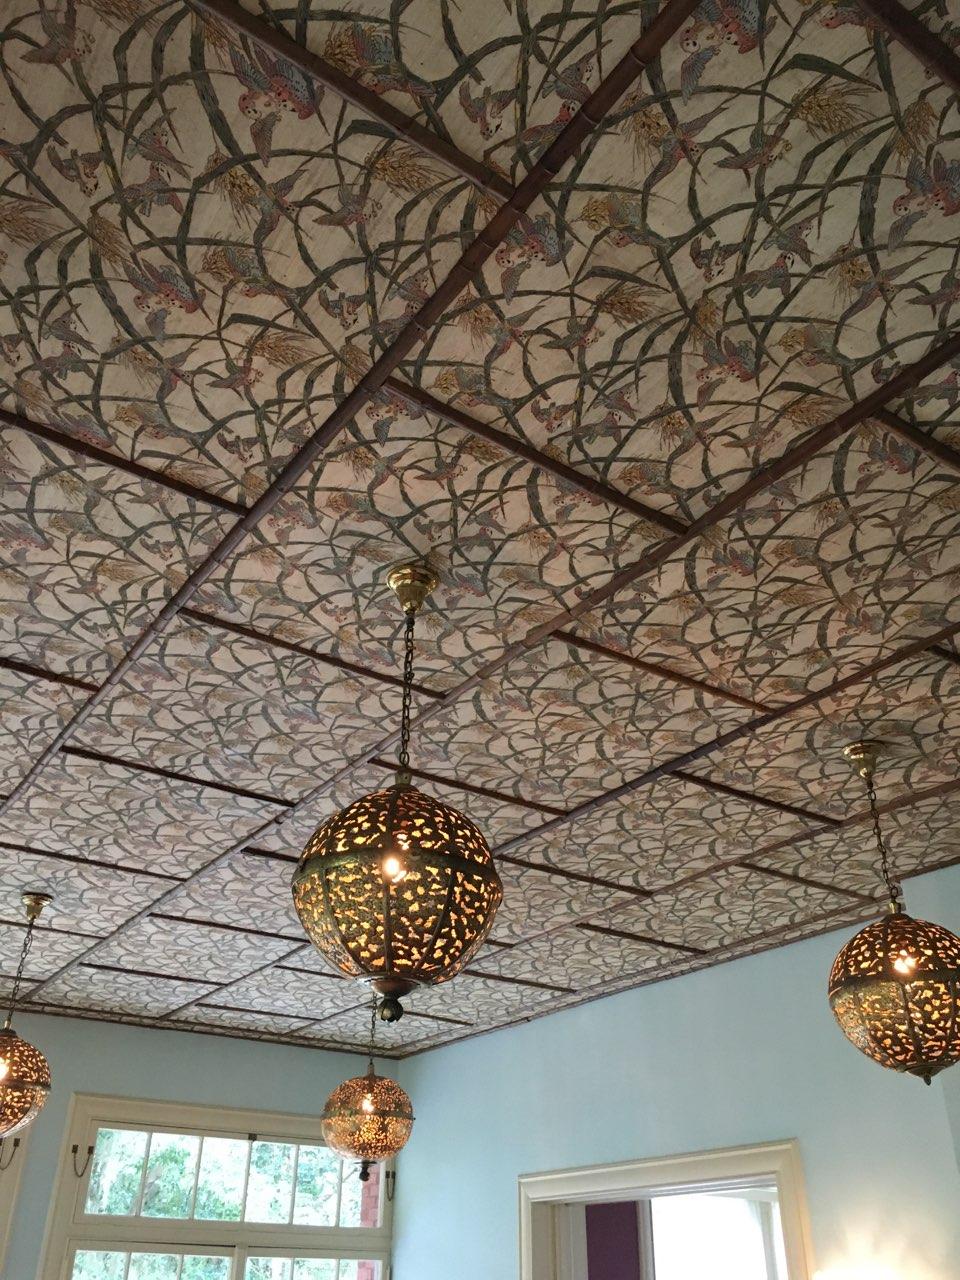 Reproduction wallpaper installed on the ceiling with the original bamboo lattice re-installed